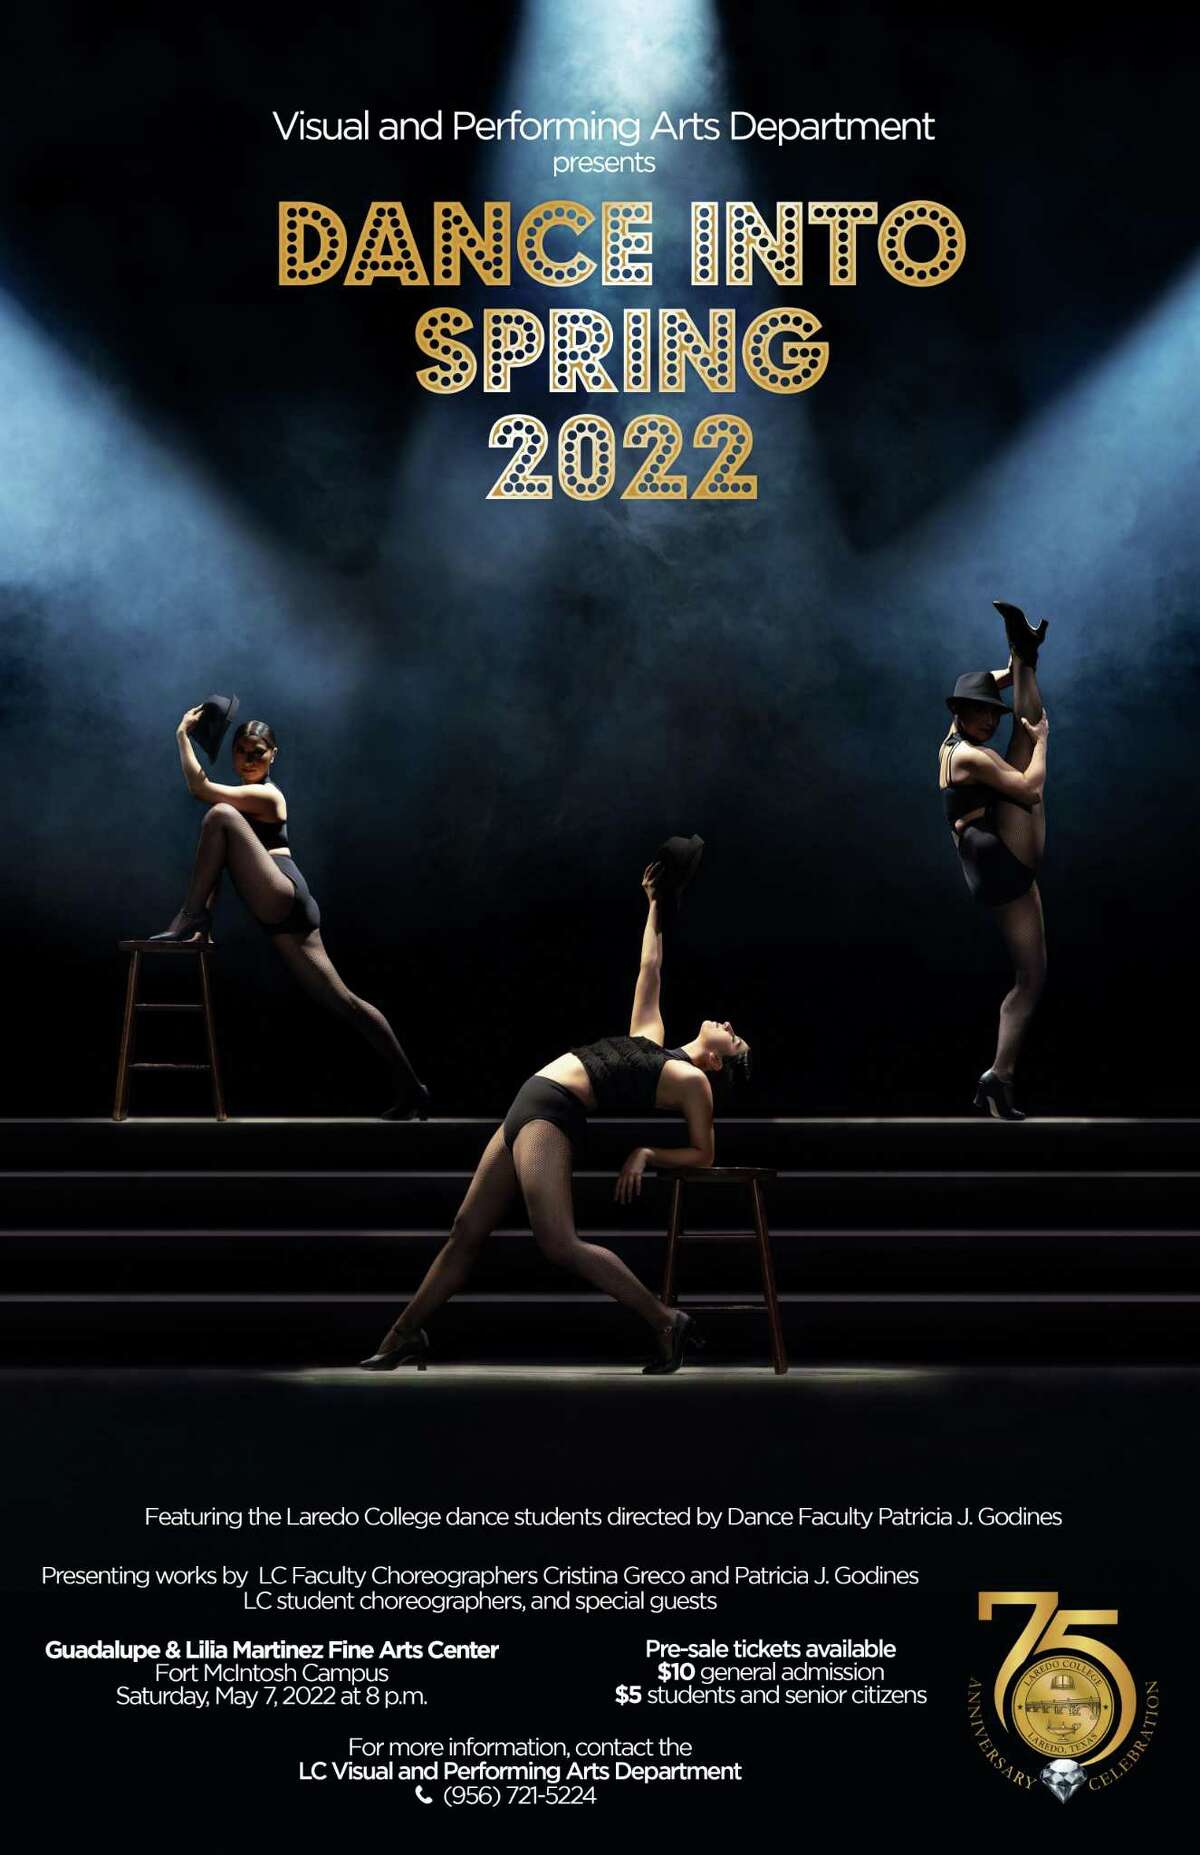 This one-night show presented by the LC Dance Theatre and directed by LC Dance Faculty Patricia J. Godines promises a well-rounded experience with an incredible variety of dance performances.